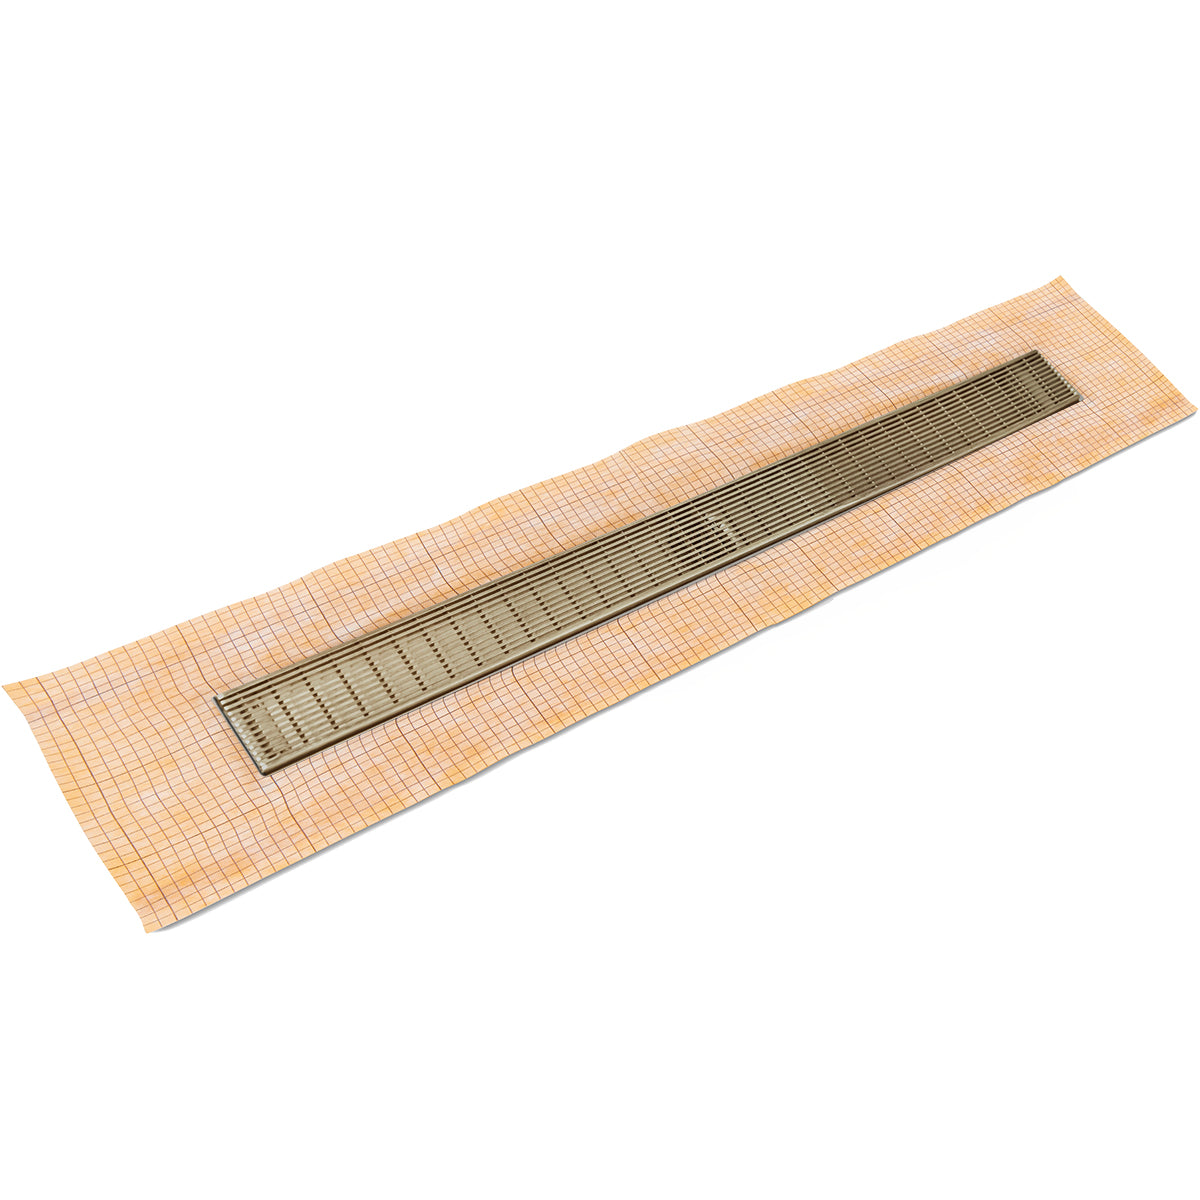 Infinity Drain 24" FCS Series Schluter-Kerdi - Fixed Flange Linear Drain Kit with 2 1/2" Wedge Wire Grate